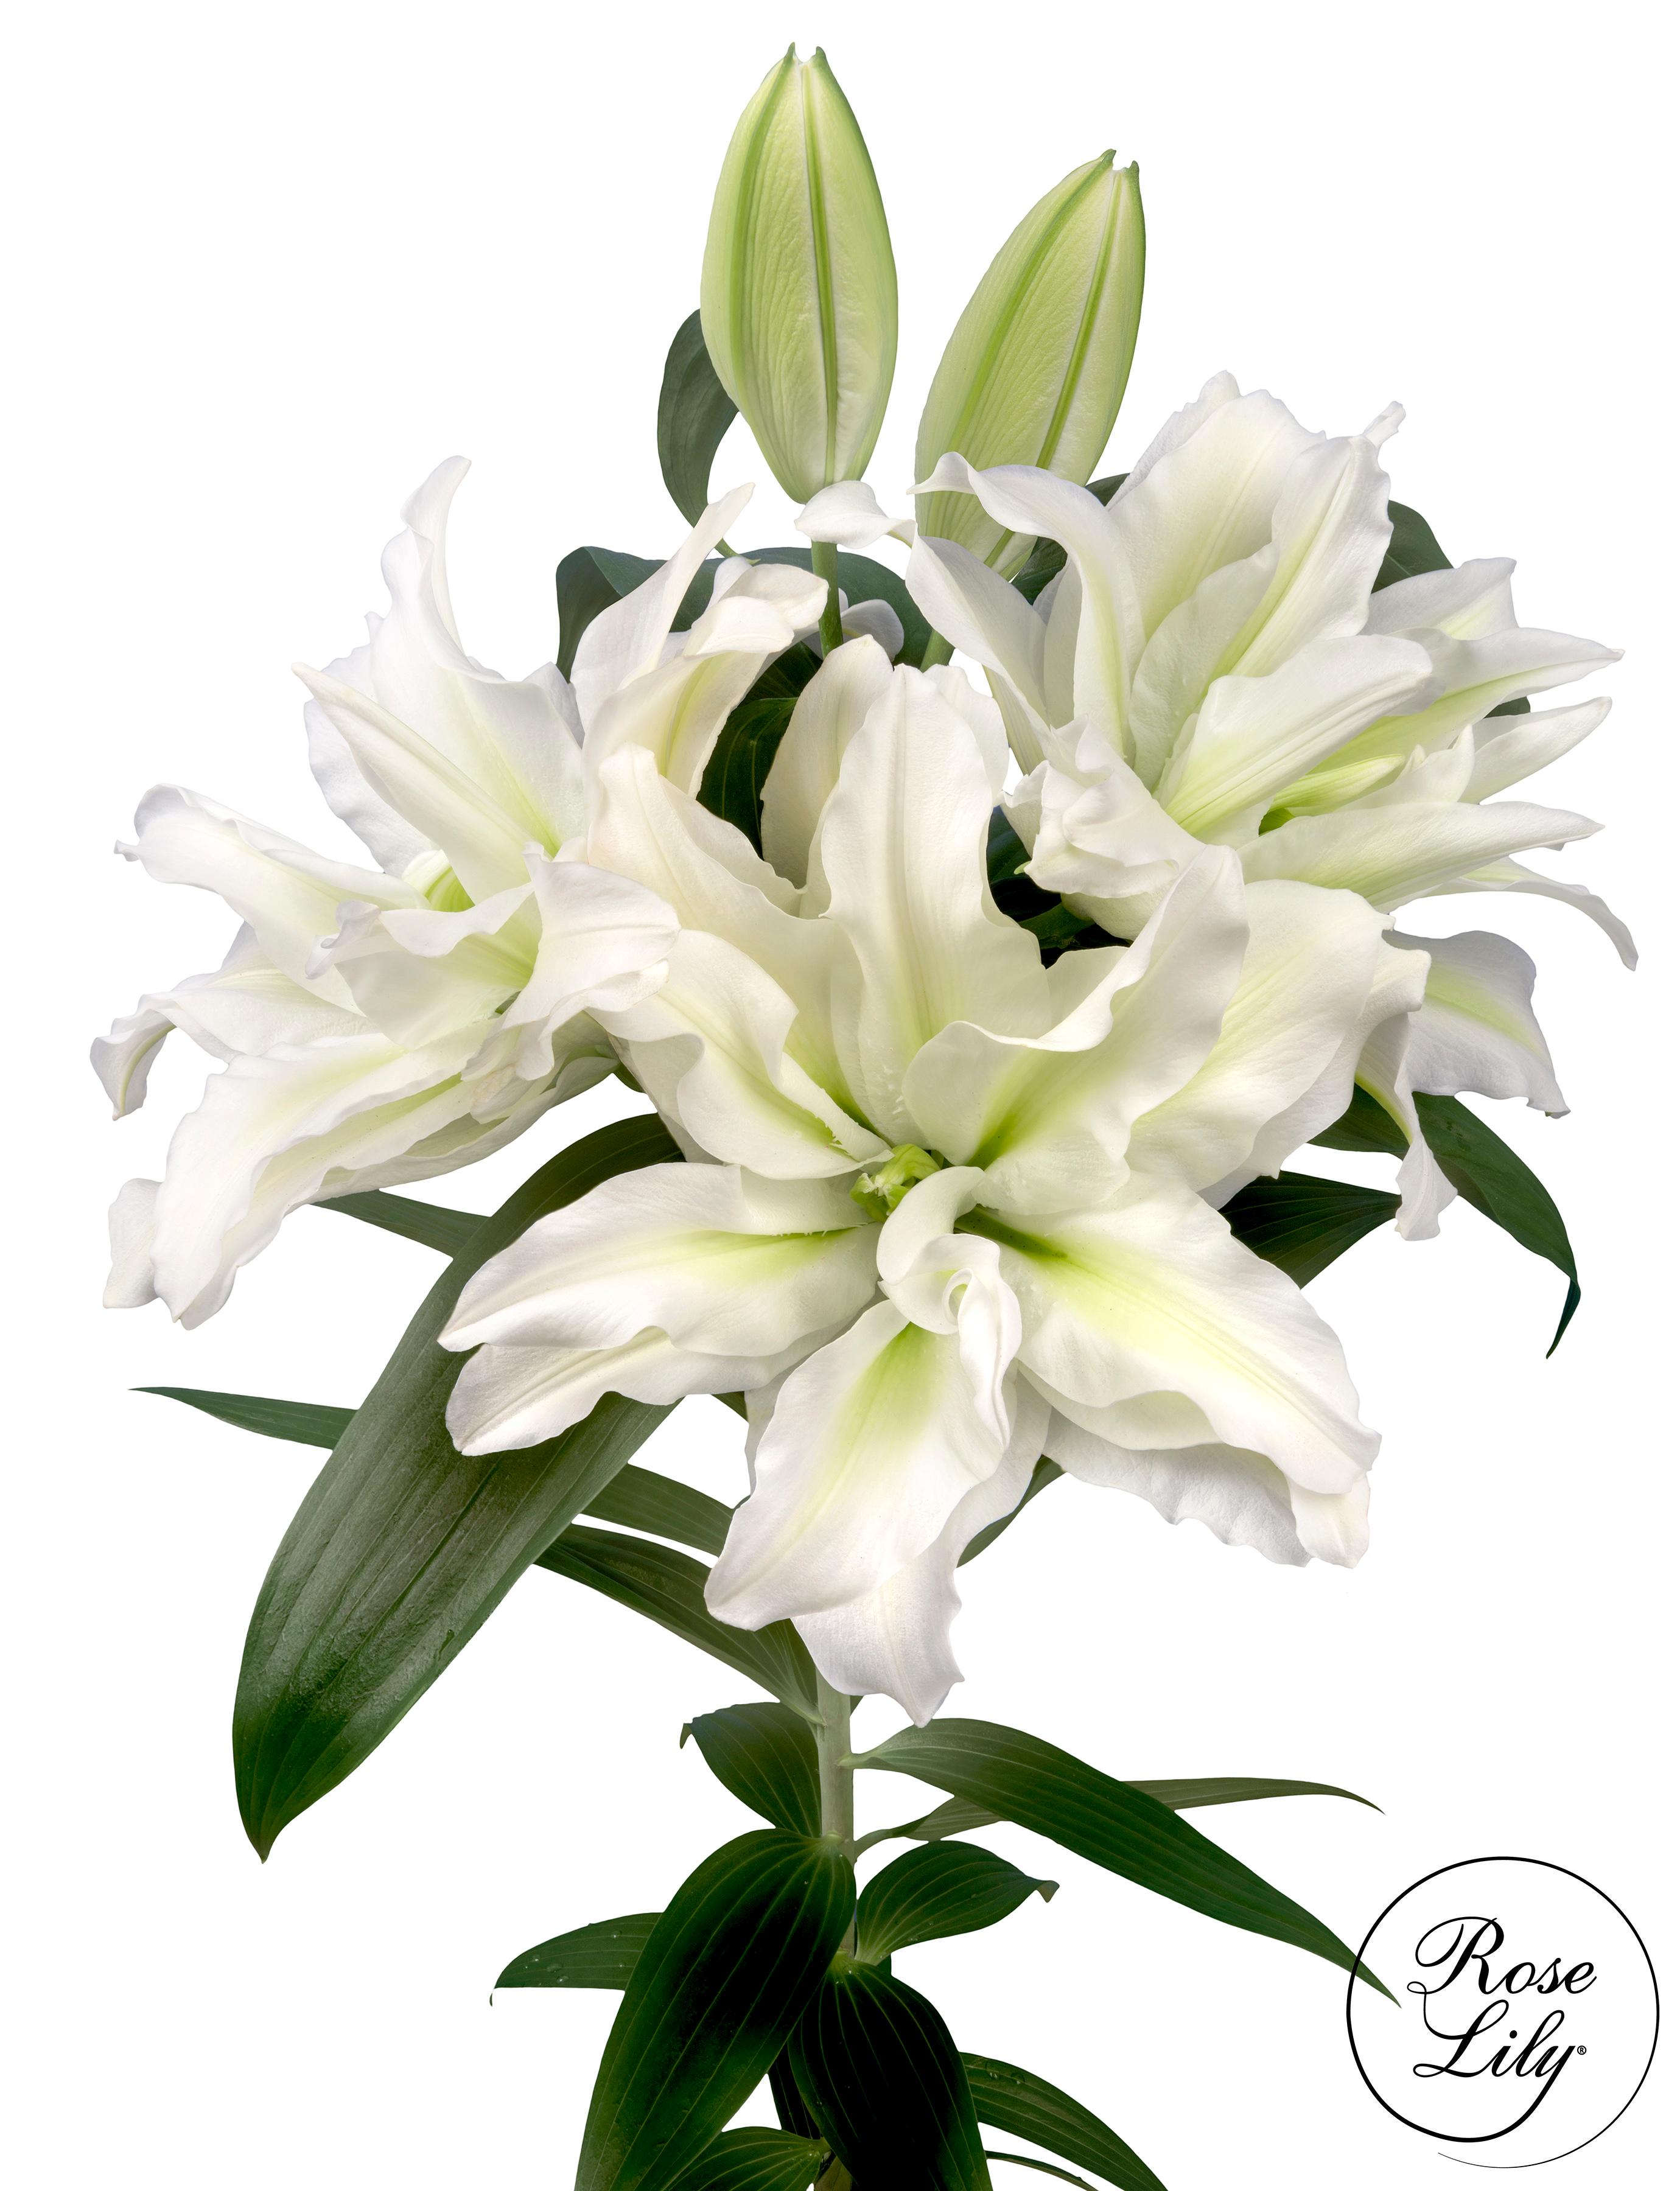 Lilies Double Oriental 'Roselily Aisha' - Double Oriental Lilies from Leo Berbee Bulb Company